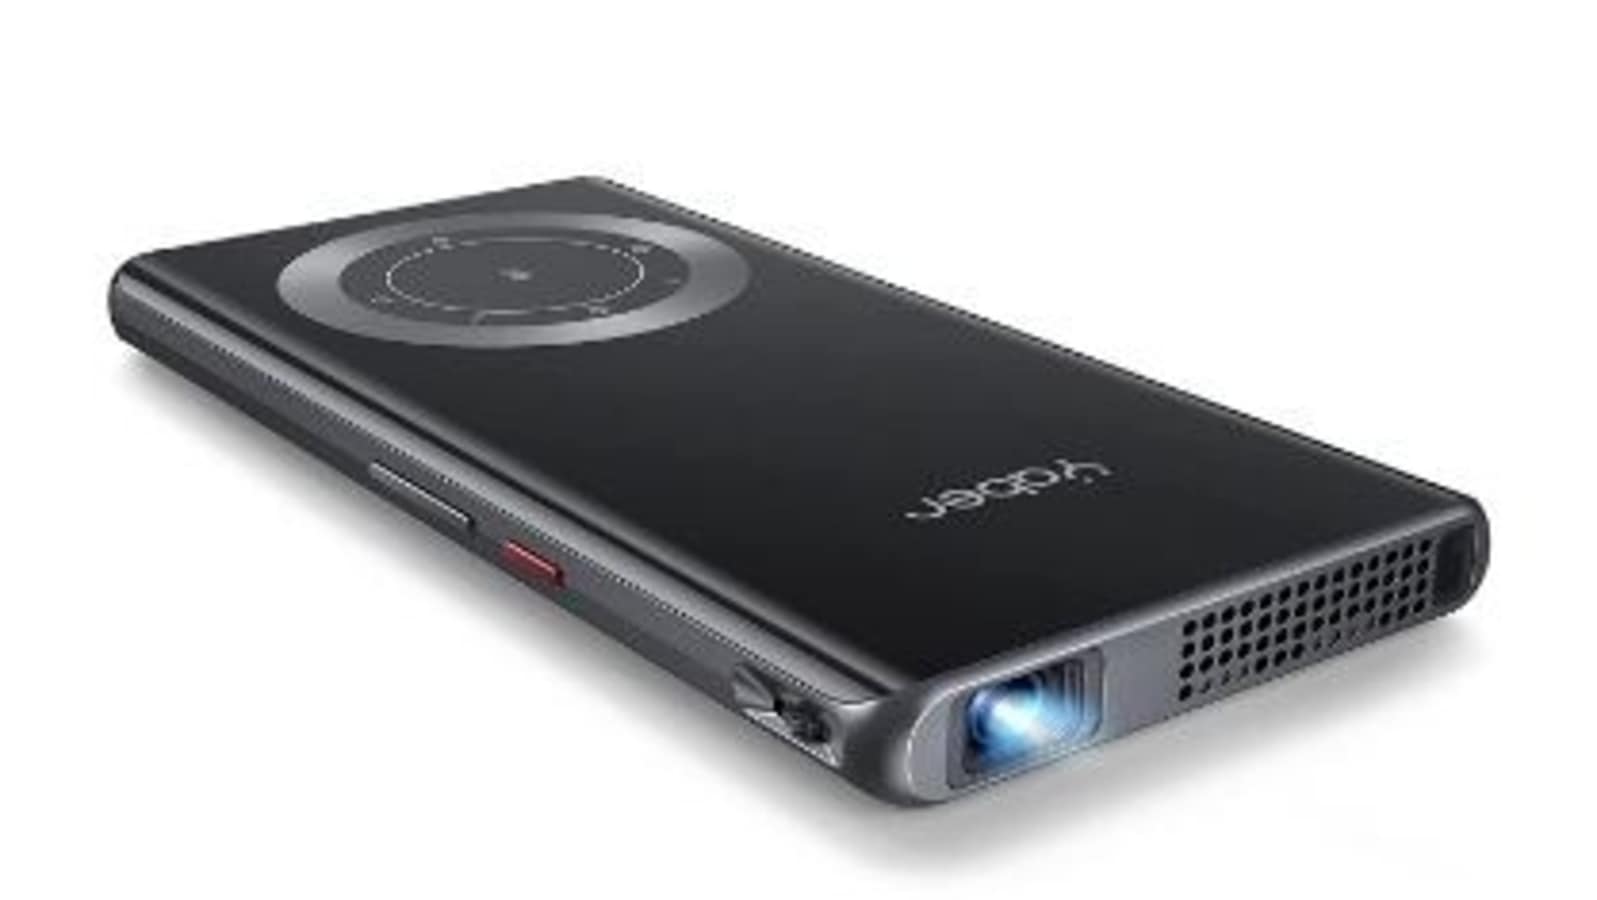 Yaber V6 TFT LCD Projector Specs